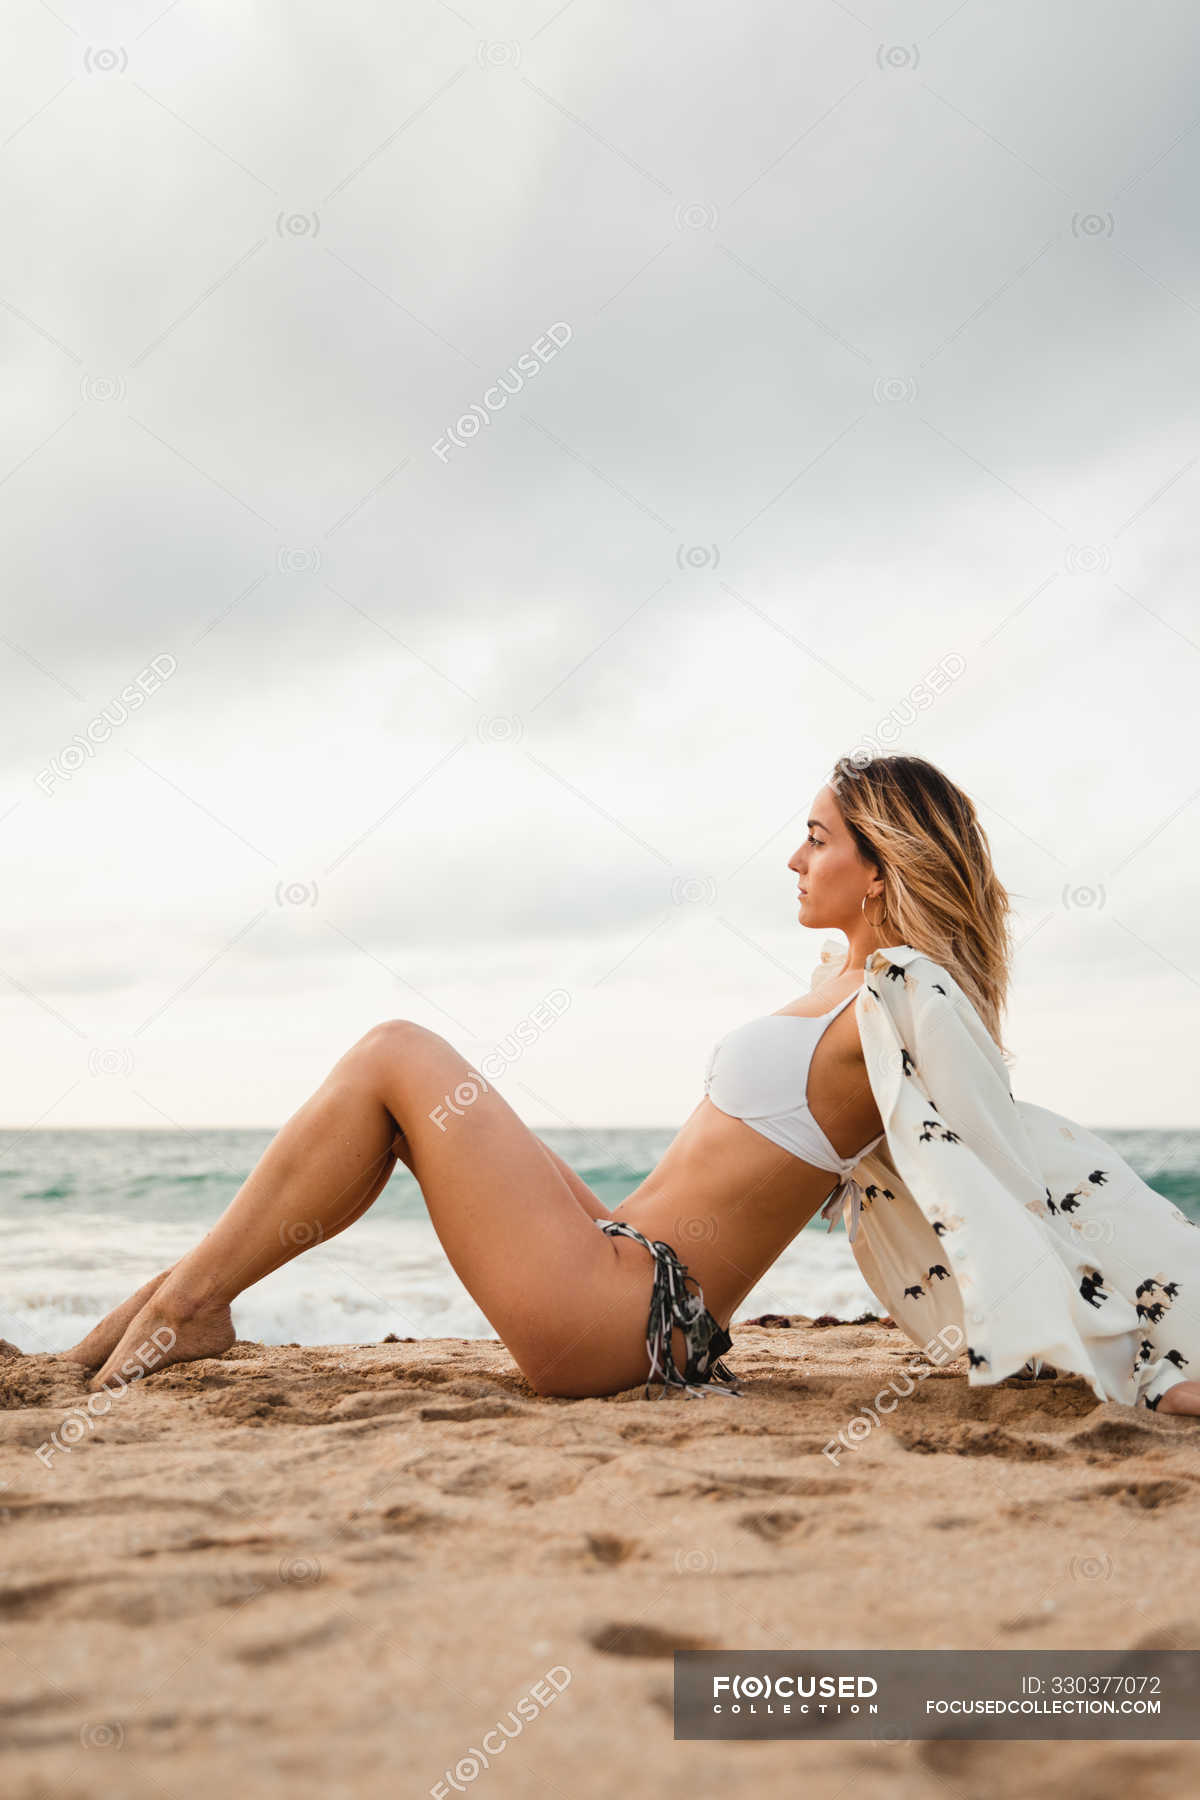 view of slim woman bikini and blouse leaning back and looking away while sitting on sandy coast against gray overcast sky — attractive, calm - Stock Photo | #330377072